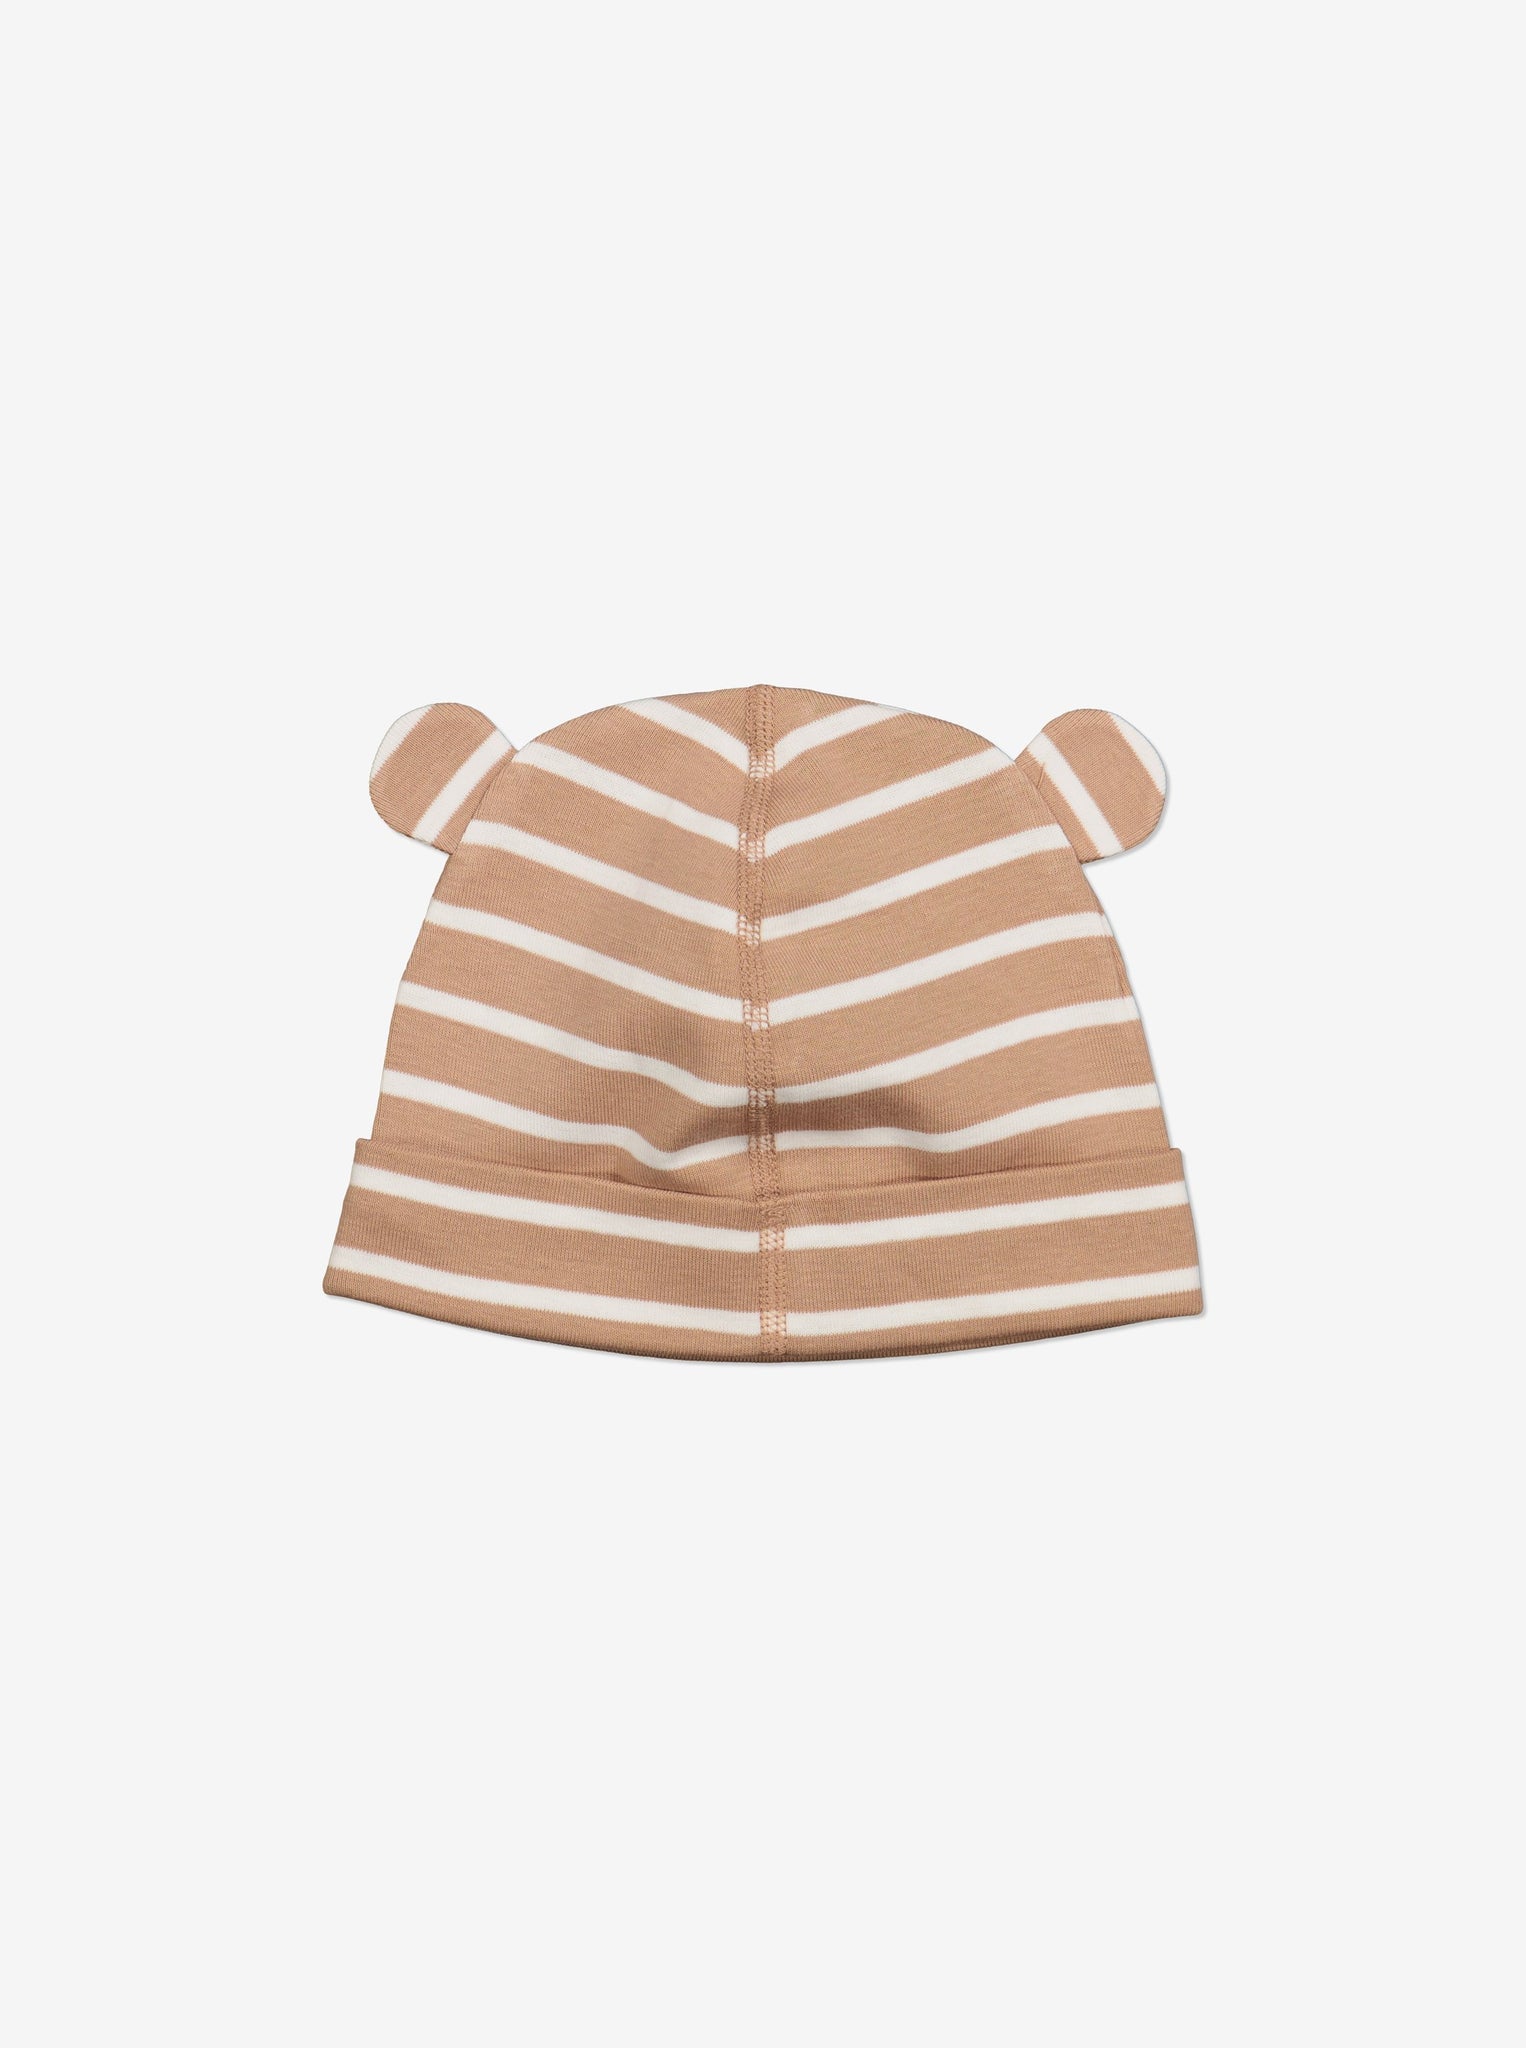  Organic Brown Baby Beanie Hat from Polarn O. Pyret Kidswear. Made with 100% organic cotton.